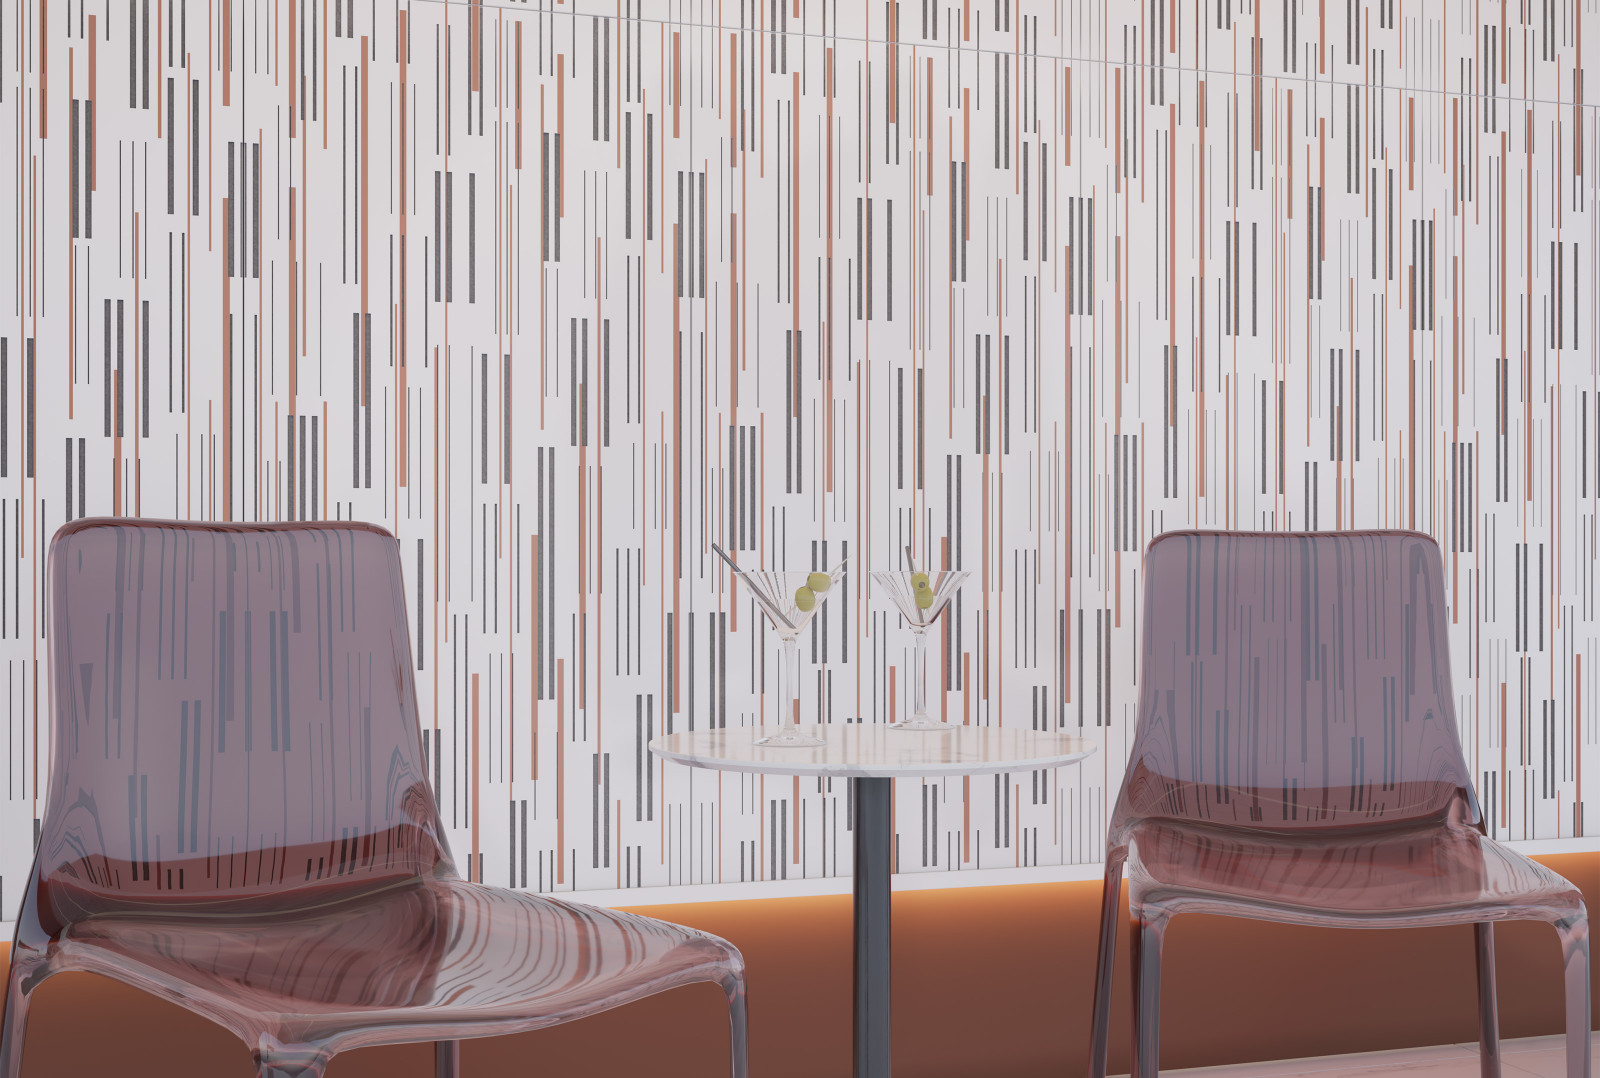 This is a close-up image of a seating area with two red chairs and a glass table holding two martini glasses with green olives in them. The wall behind the seating area is VaporHue™ Astra panels featuring Soft Sound® Backers in Graphite by Arktura.